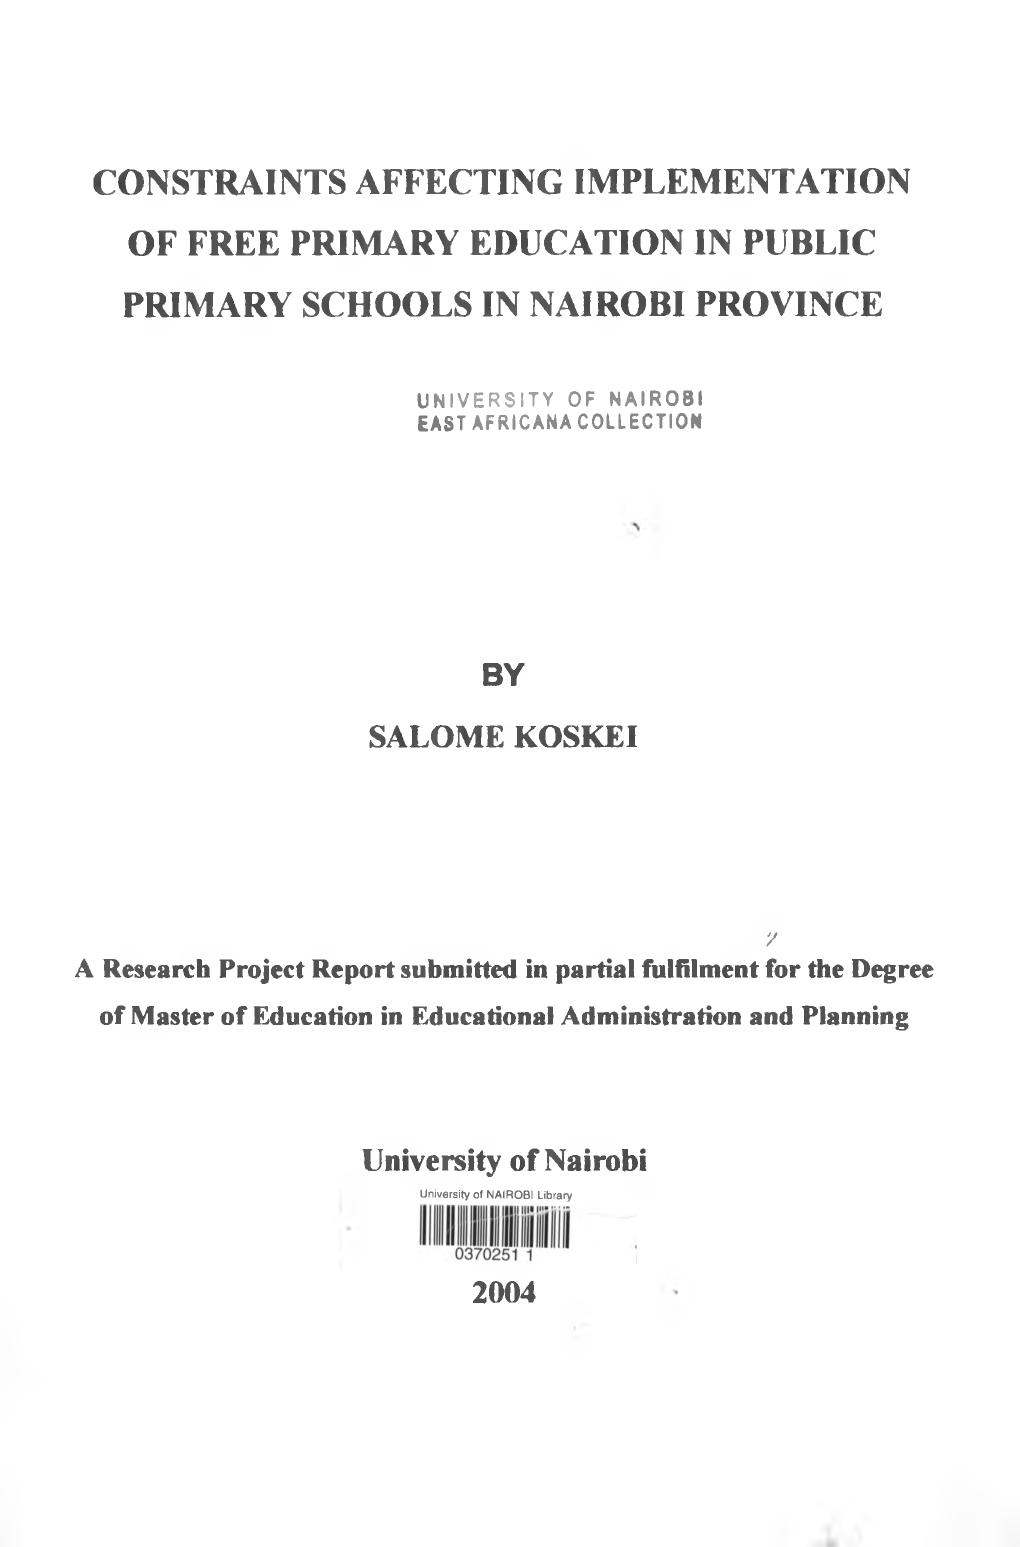 Constraints Affecting Implementation of Free Primary Education in Public Primary Schools in Nairobi Province